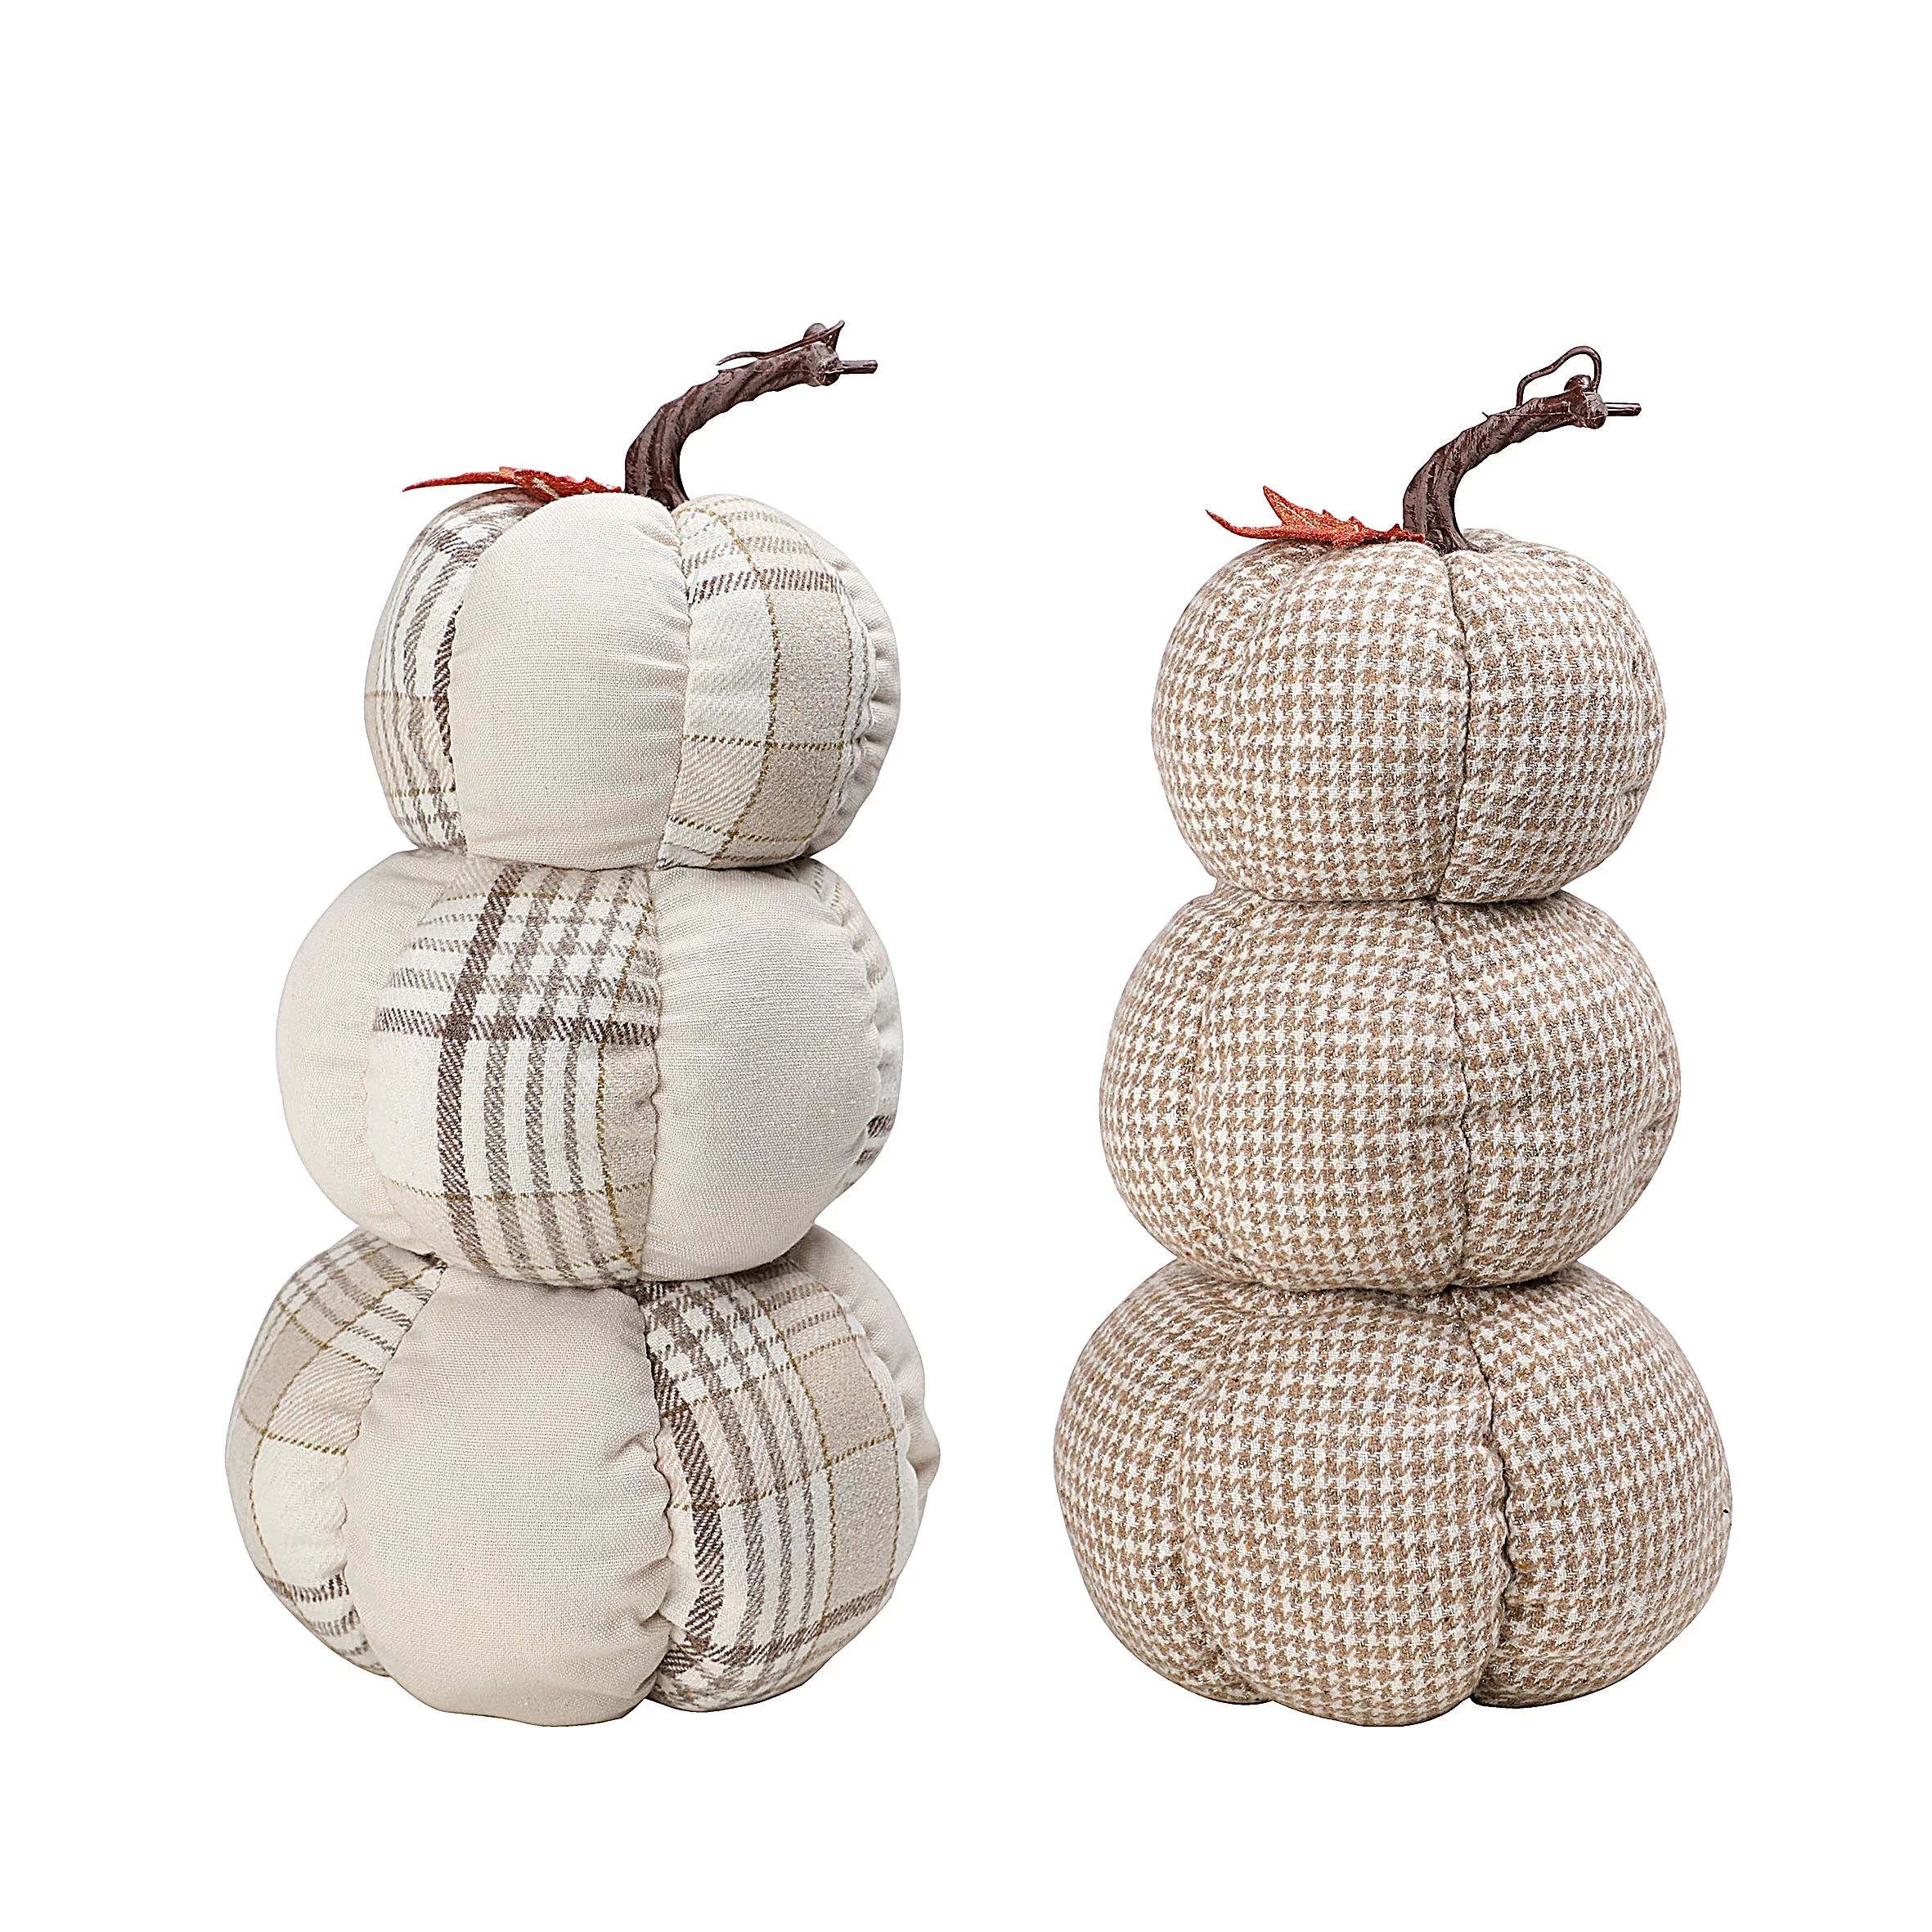 Way to Celebrate Harvest Stacked Plaid Fabric Pumpkins Décor (Set of 2) | Walmart (US)